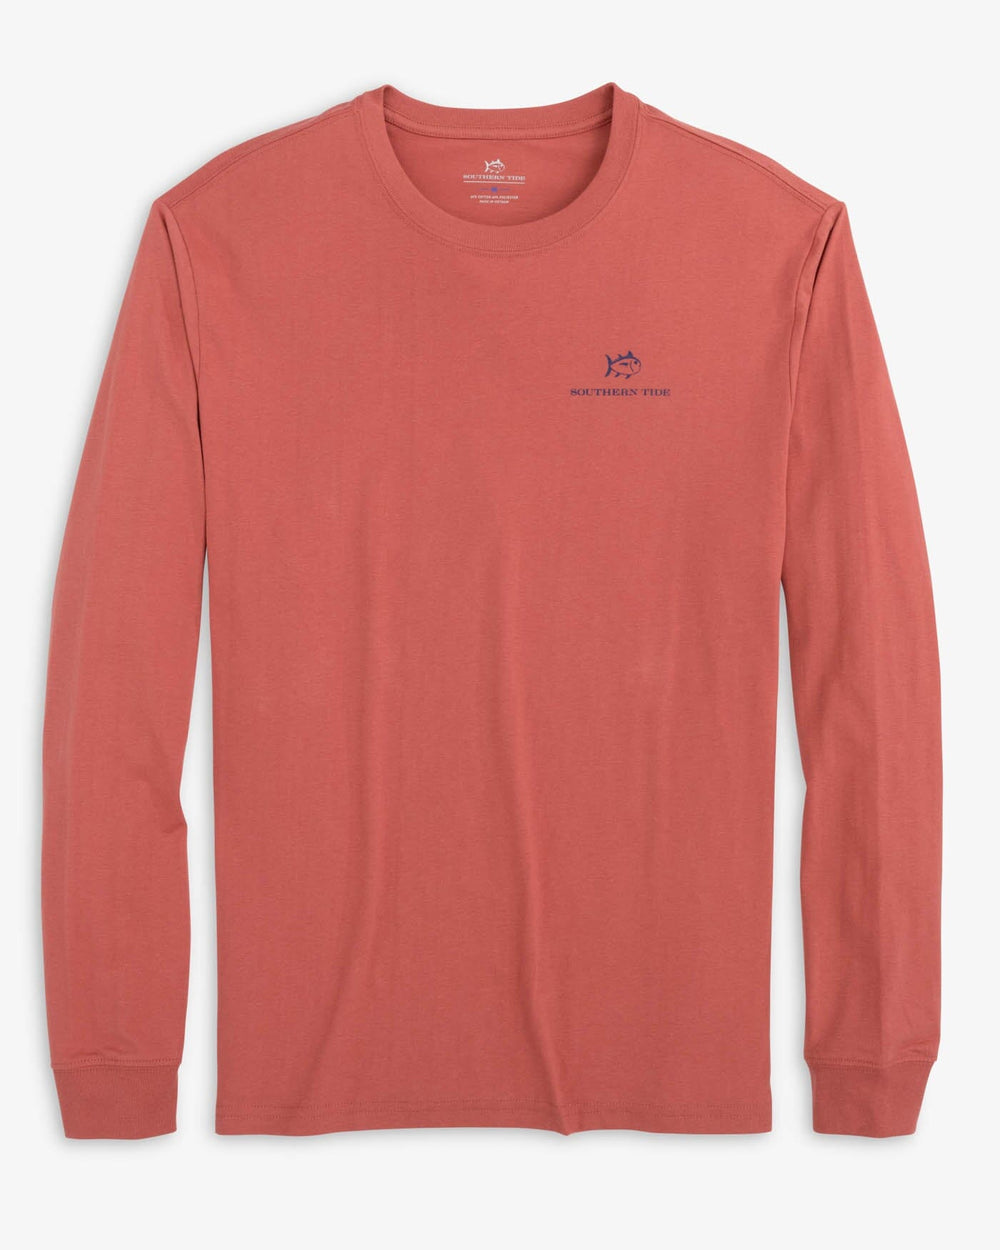 The front view of the Southern Tide On Board For Off Roads T-Shirt by Southern Tide - Dusty Coral